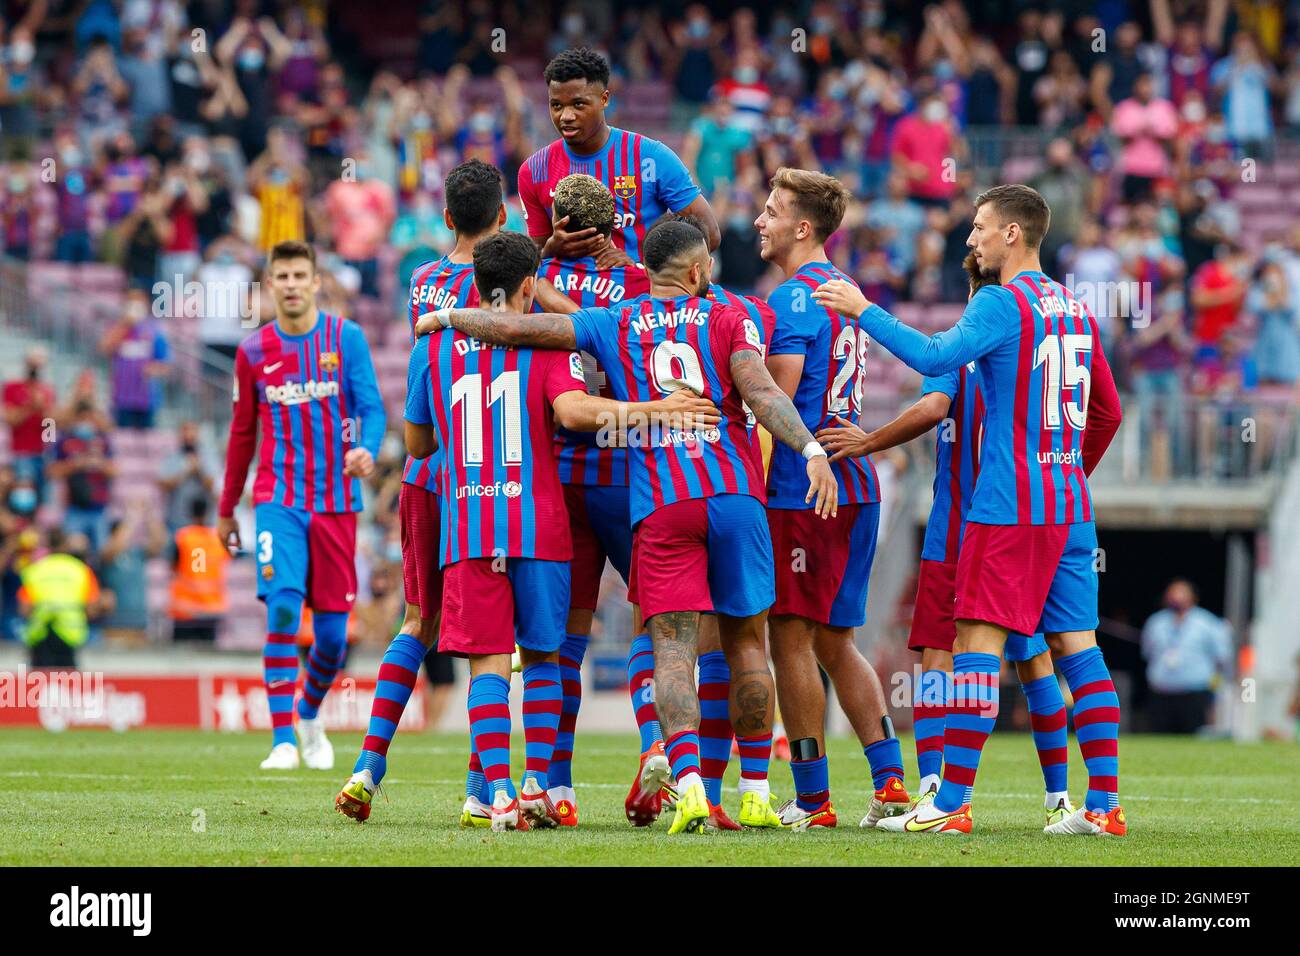 Barcelona, Spain. 26th Sep, 2021. Ansu Fati of FC Barcelona celebrate a  goal during the Liga match between FC Barcelona and UD Levante at Camp Nou  in Barcelona, Spain. Credit: DAX Images/Alamy